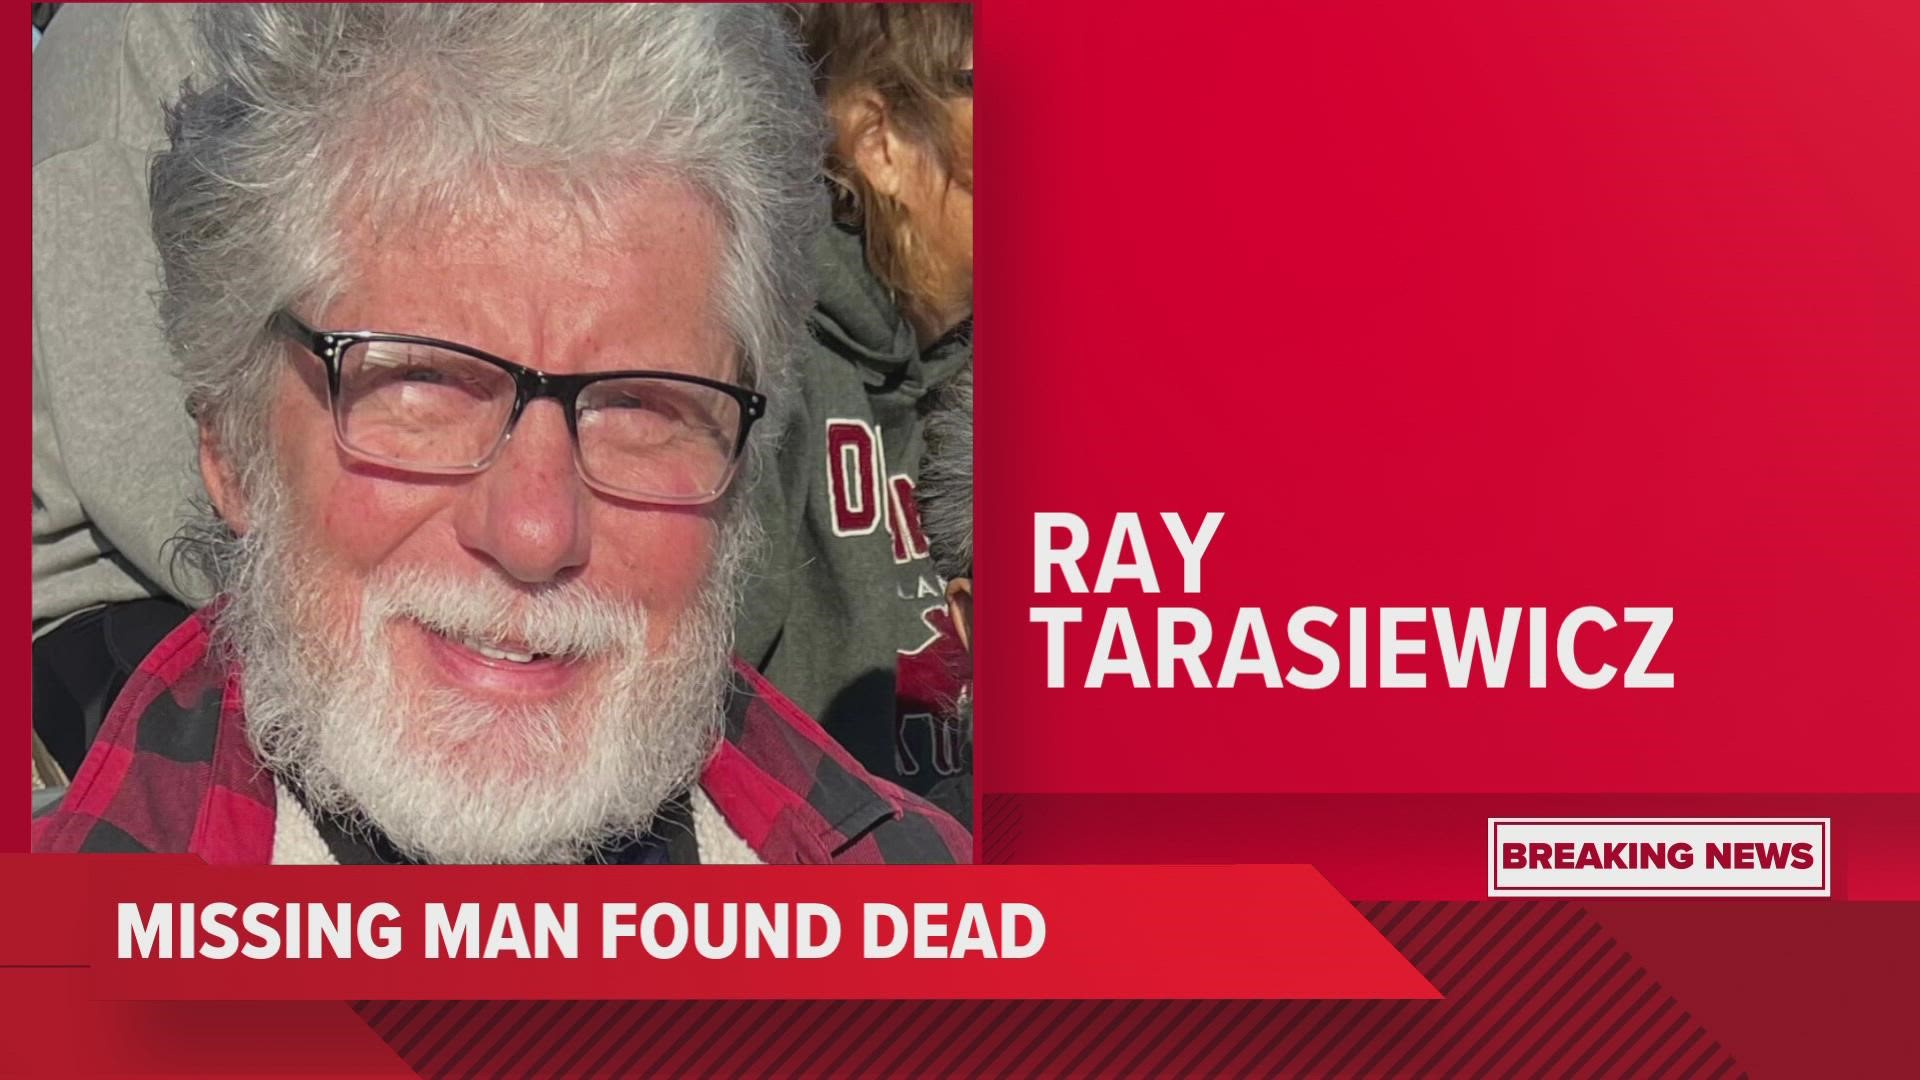 Tarasiewicz was first reported missing by his family on Nov. 21, after he left his home while shoveling snow.